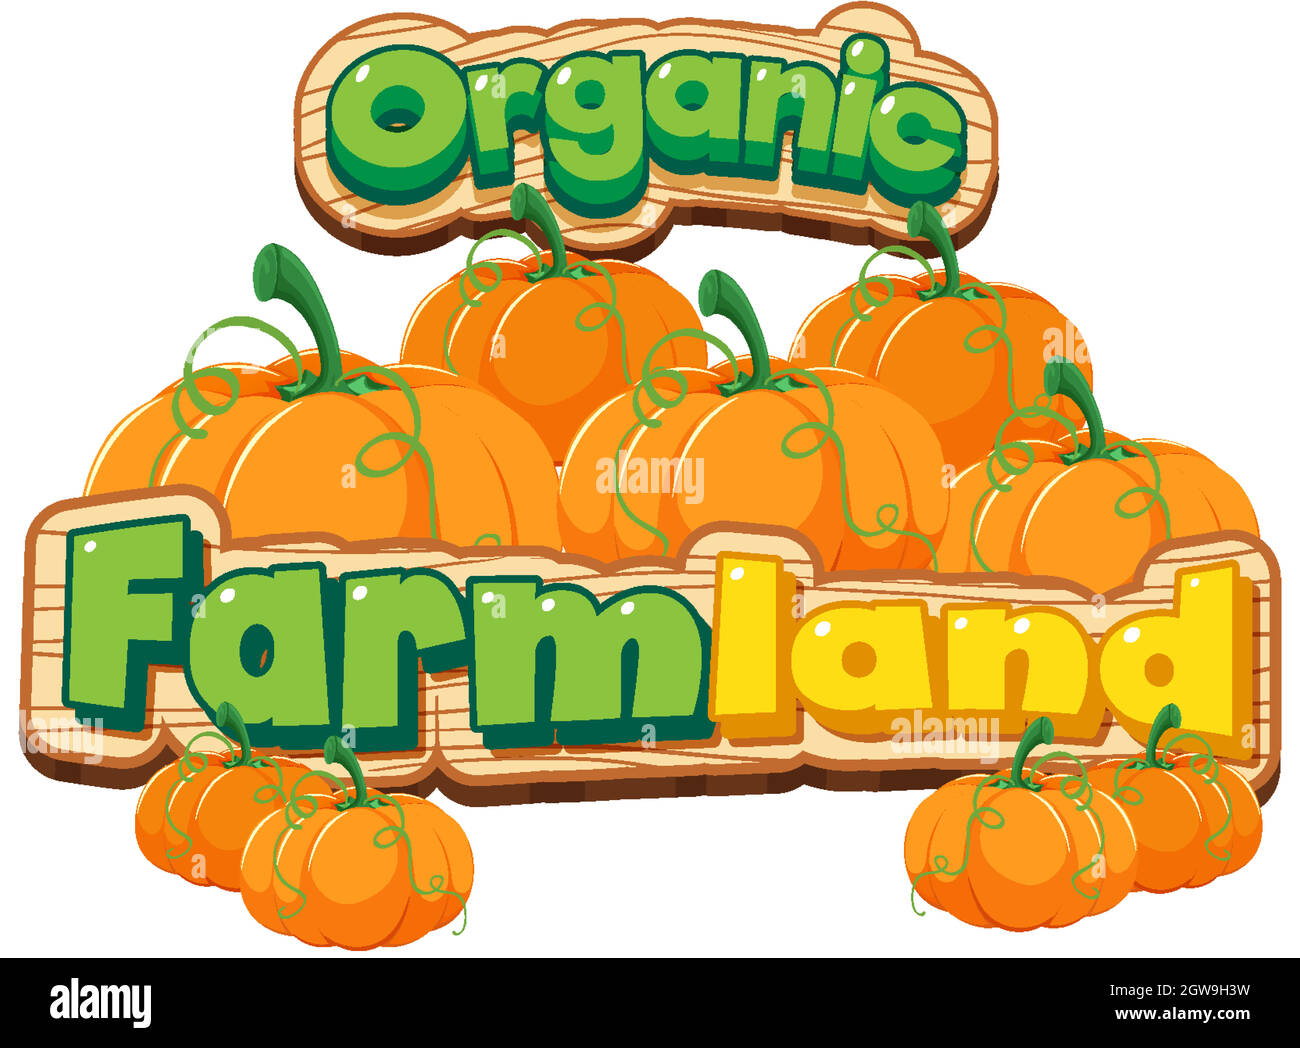 Font design for organic farmland with many pumpkins Stock Vector